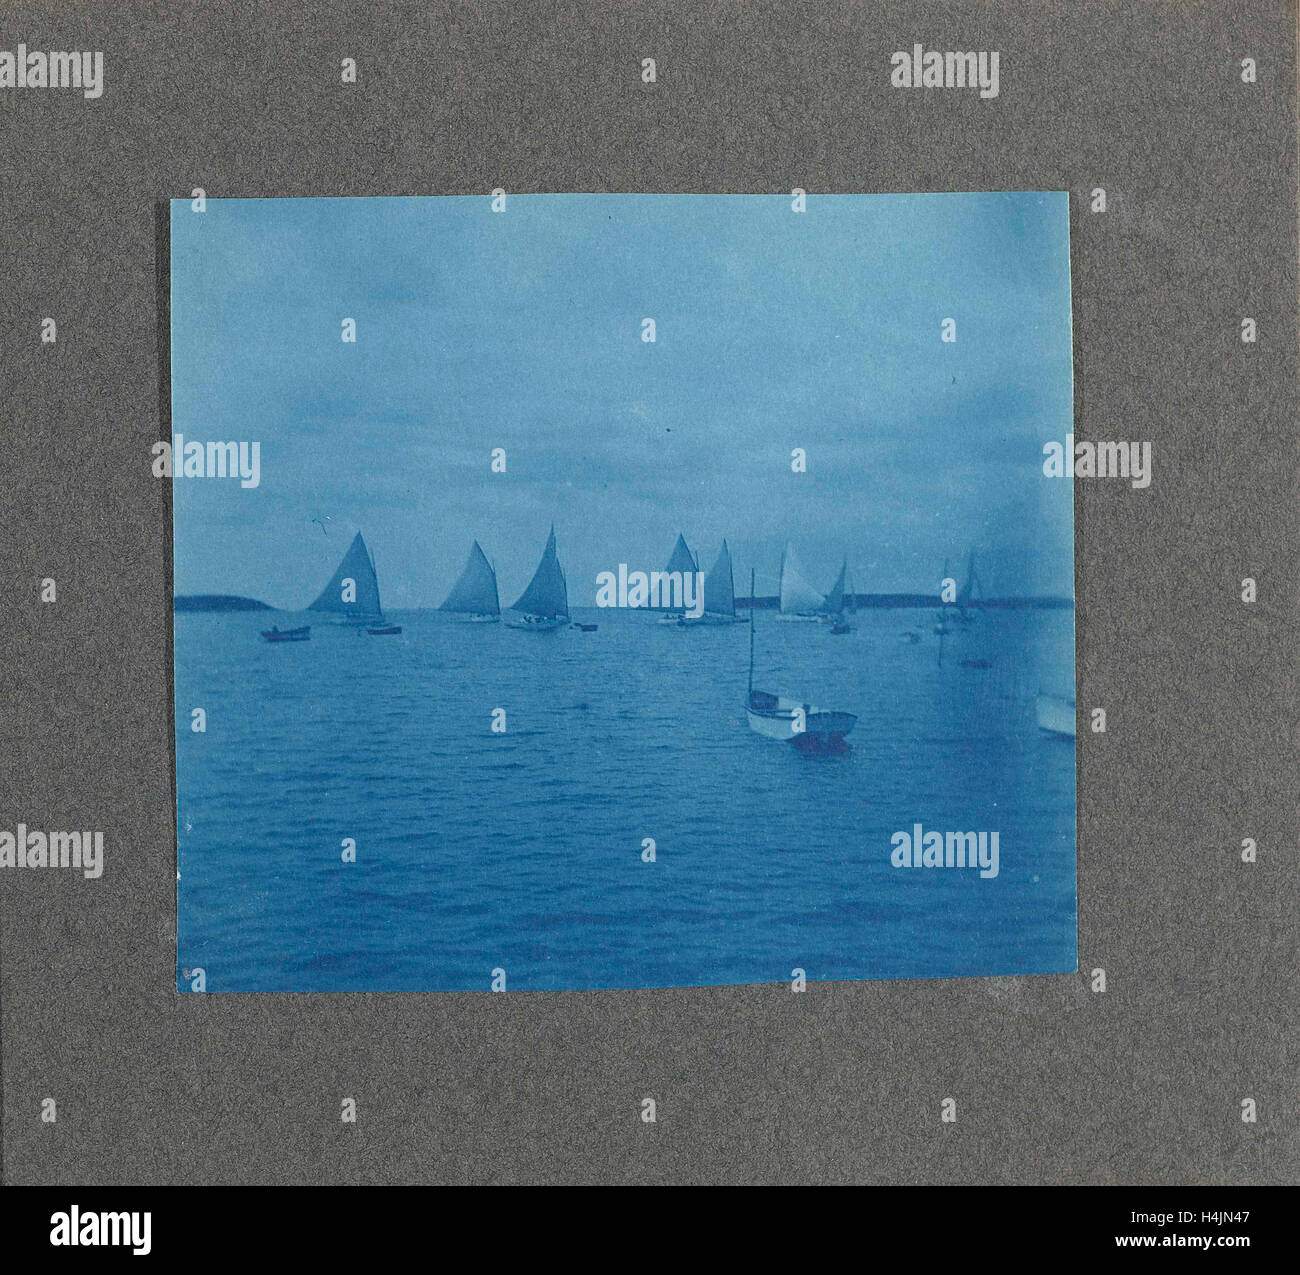 Sailing vessels on the water, United States of America, USA, Anonymous, c. 1900 - c. 1920, Cyanotype Stock Photo